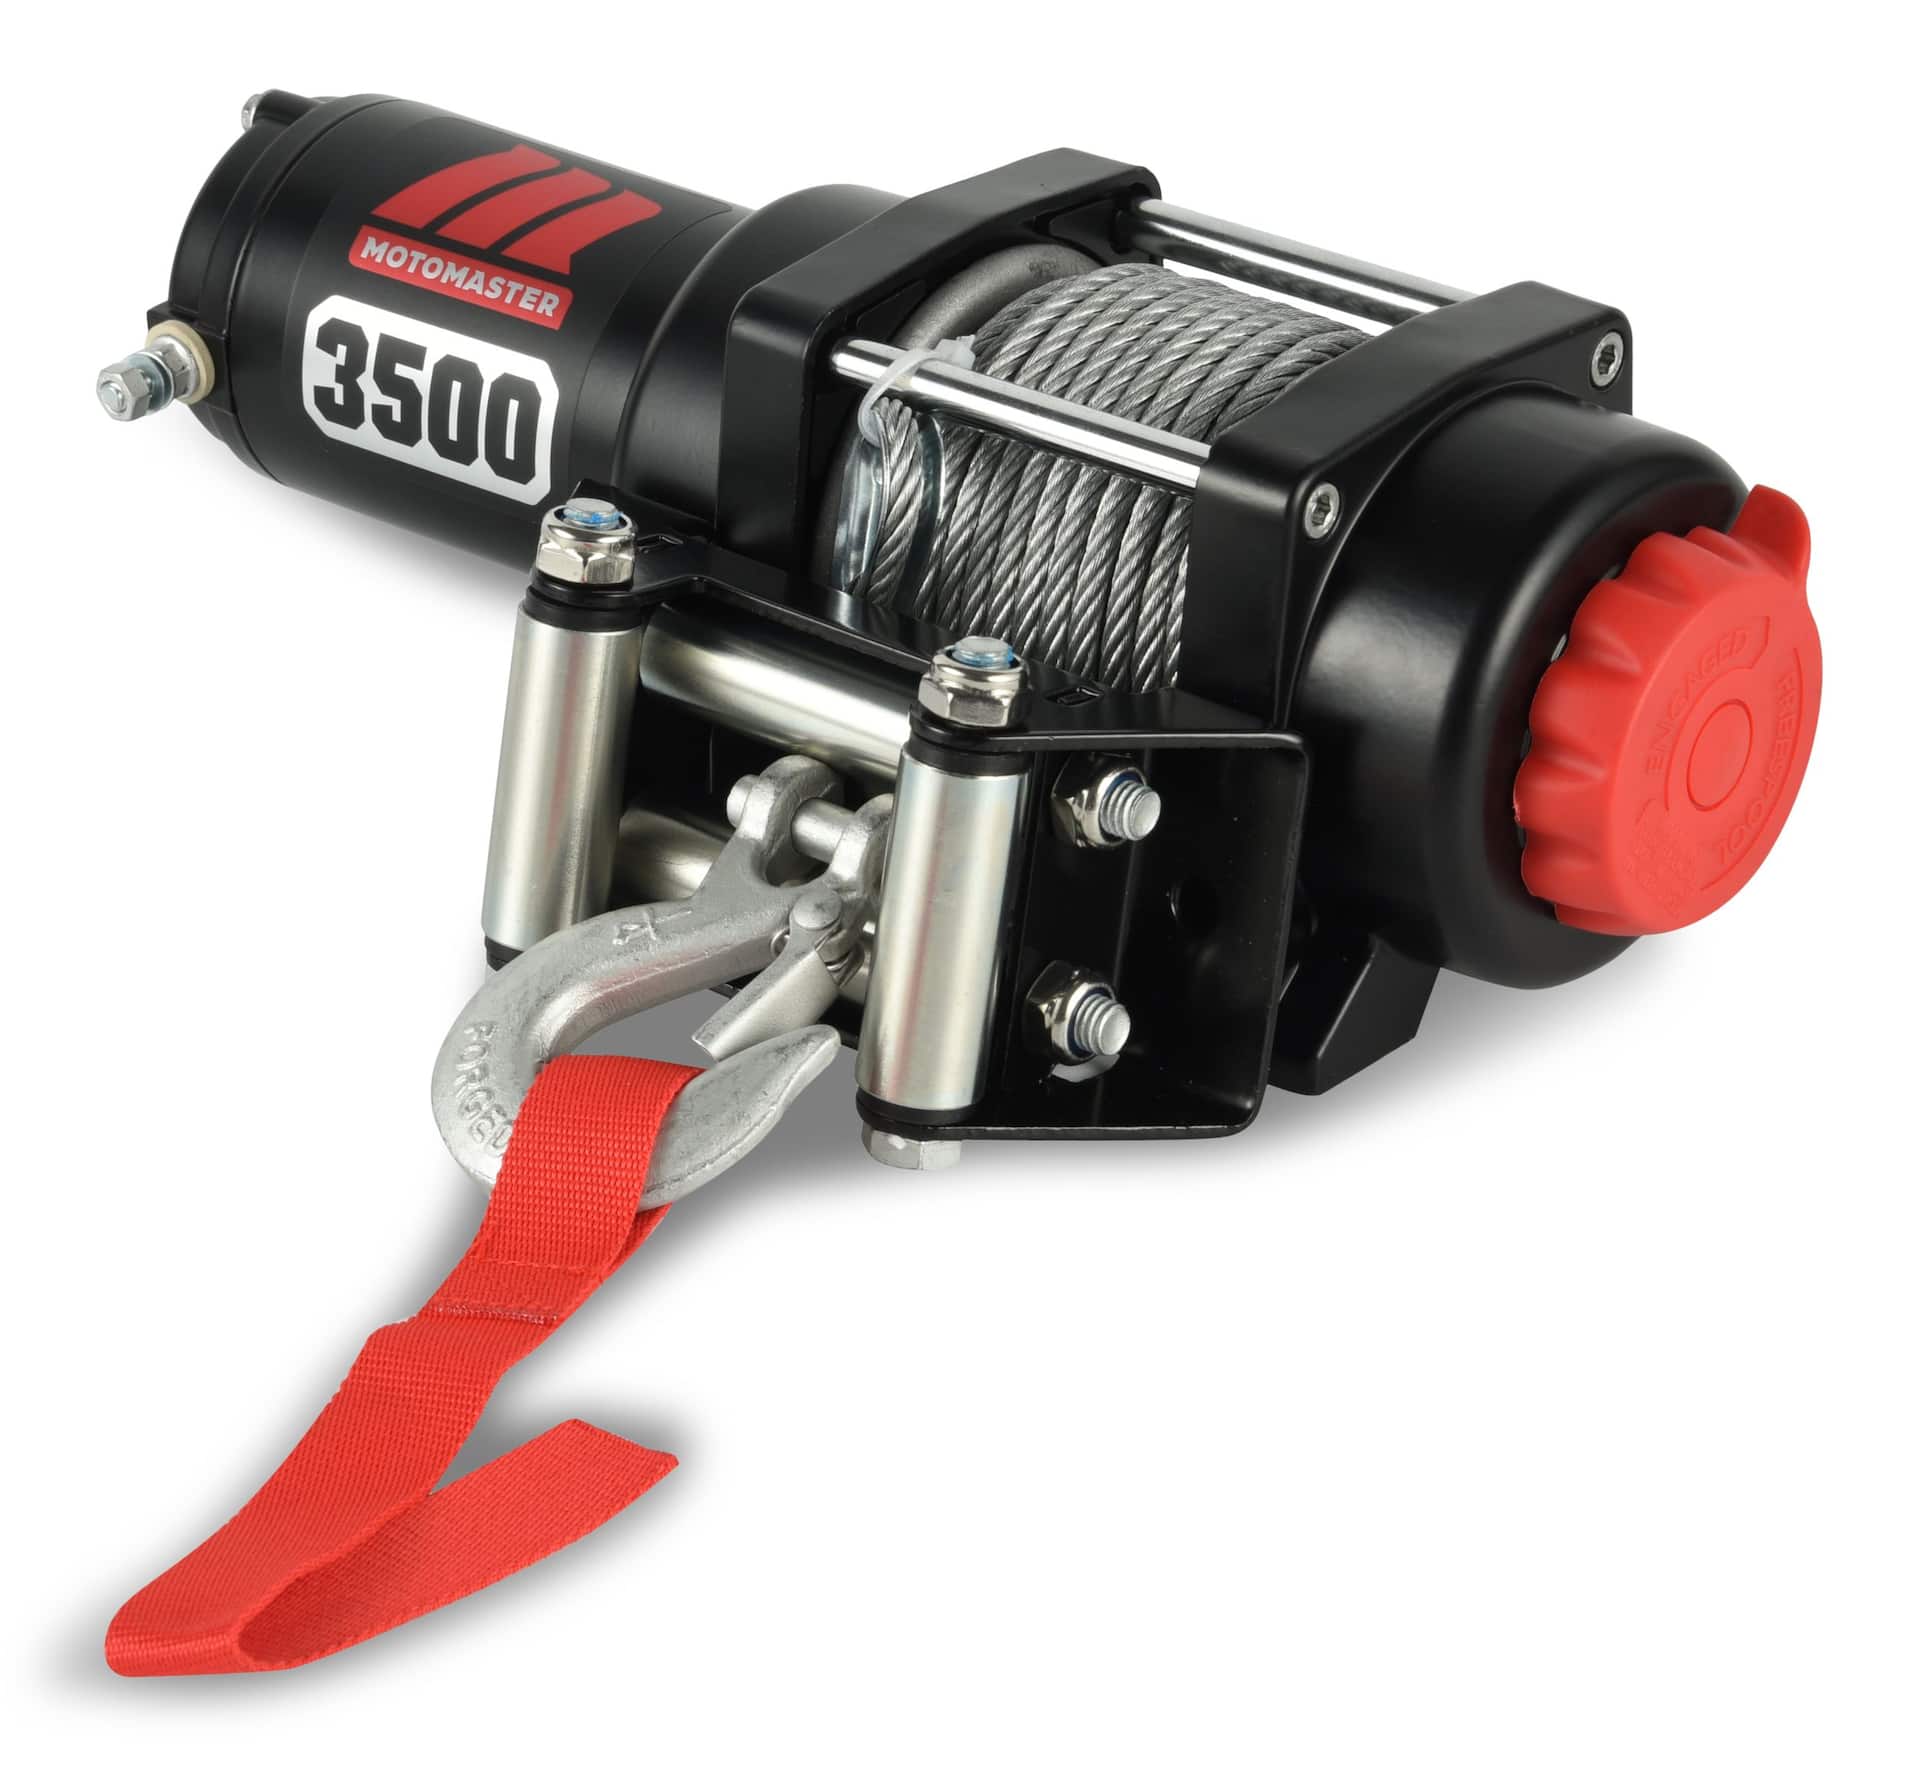 Discover Wholesale quad winch For Heavy-Duty Pulling 